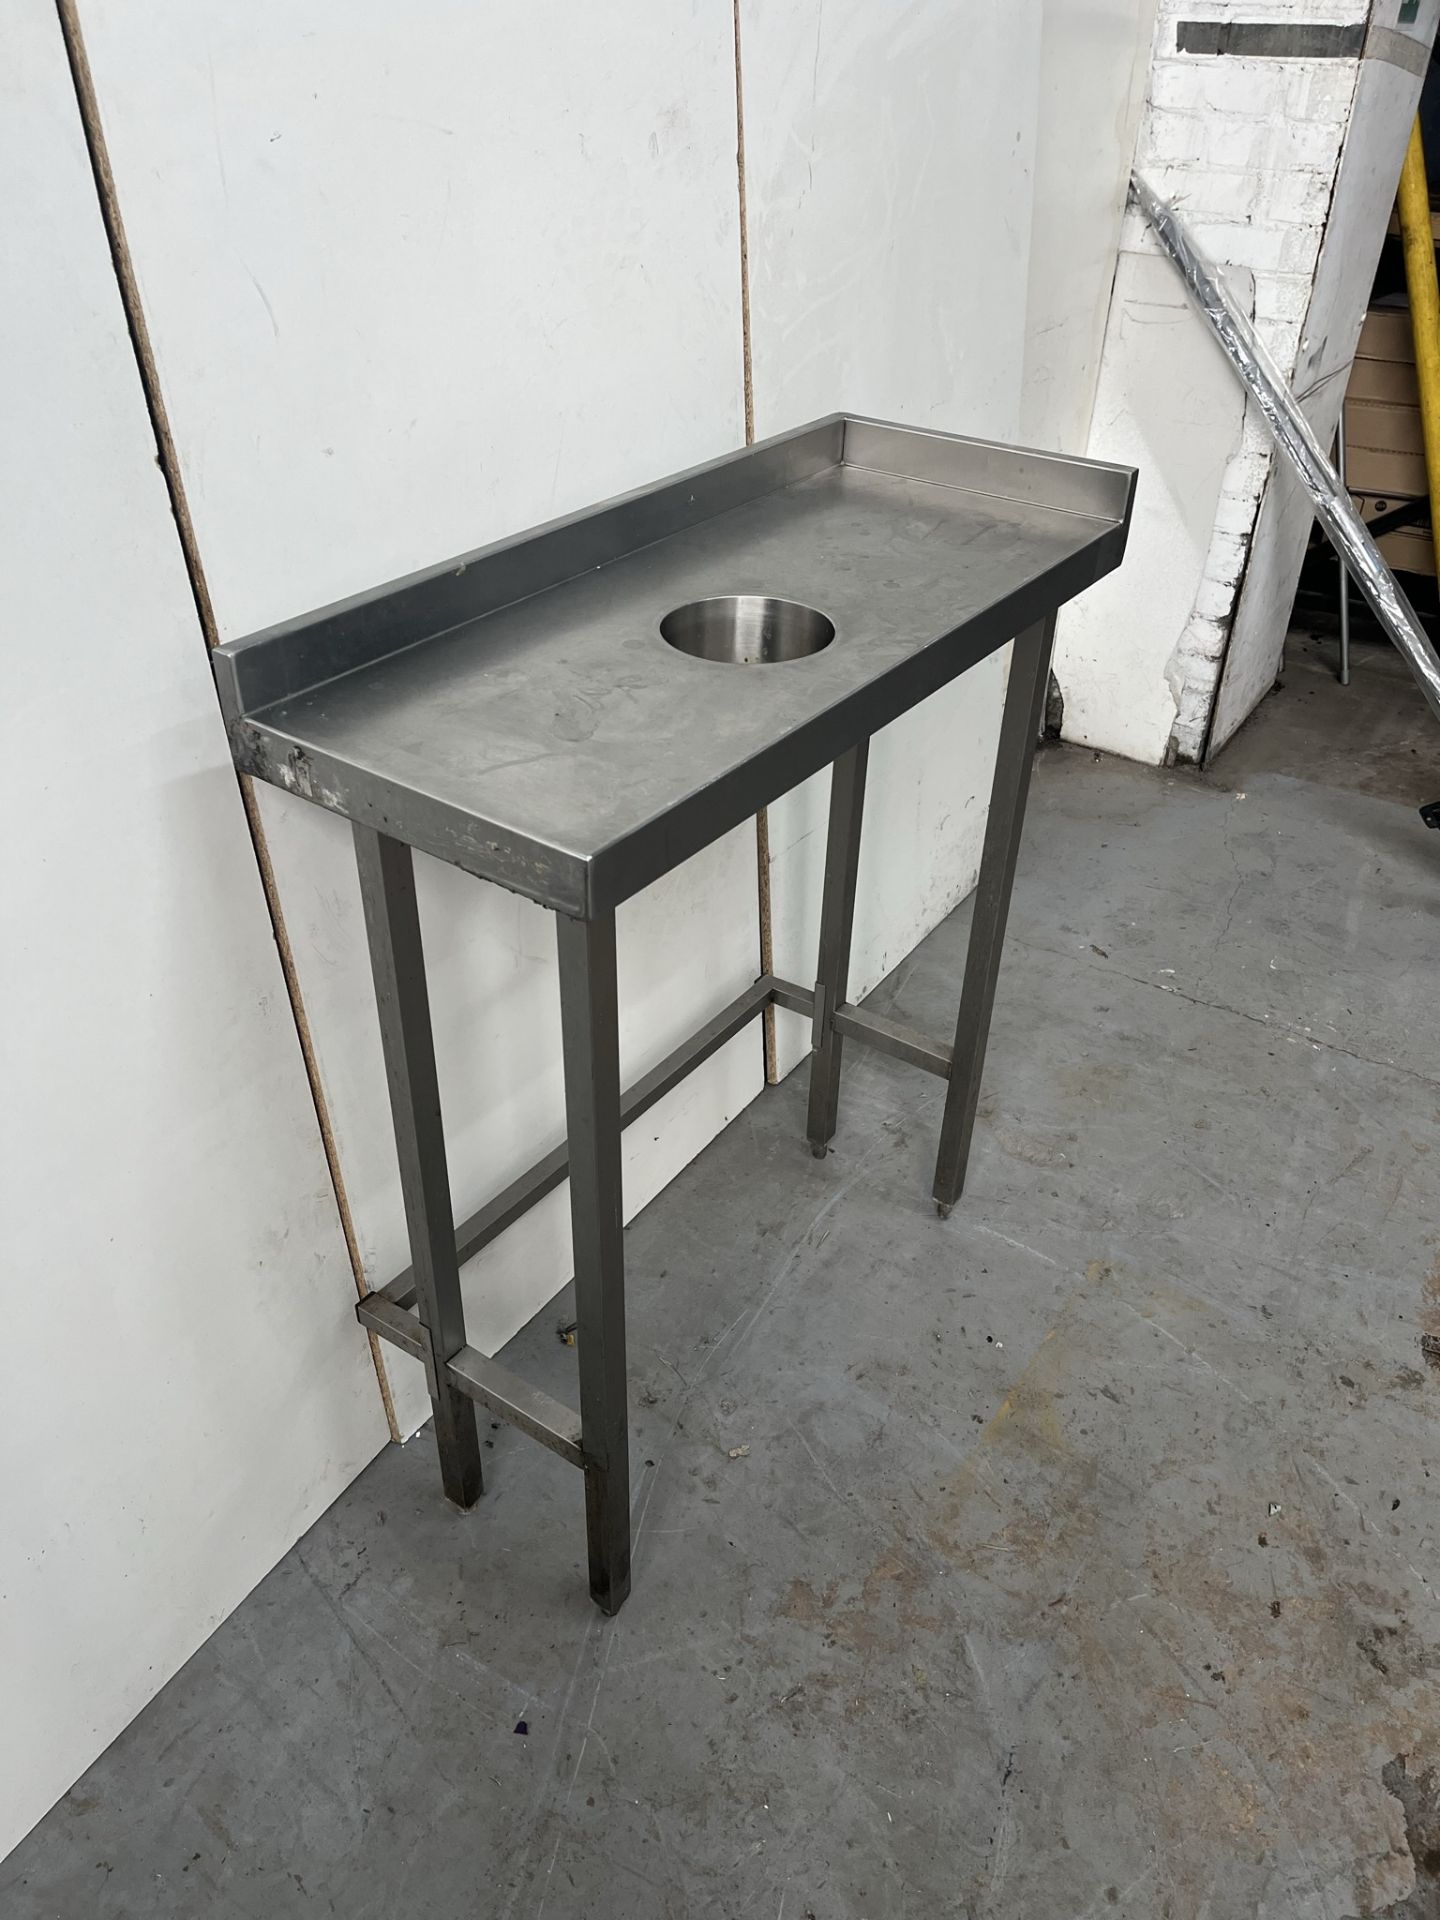 850mm Stainless Steel Catering Preperation Table With Waste Disposal Hole - Bild 3 aus 7